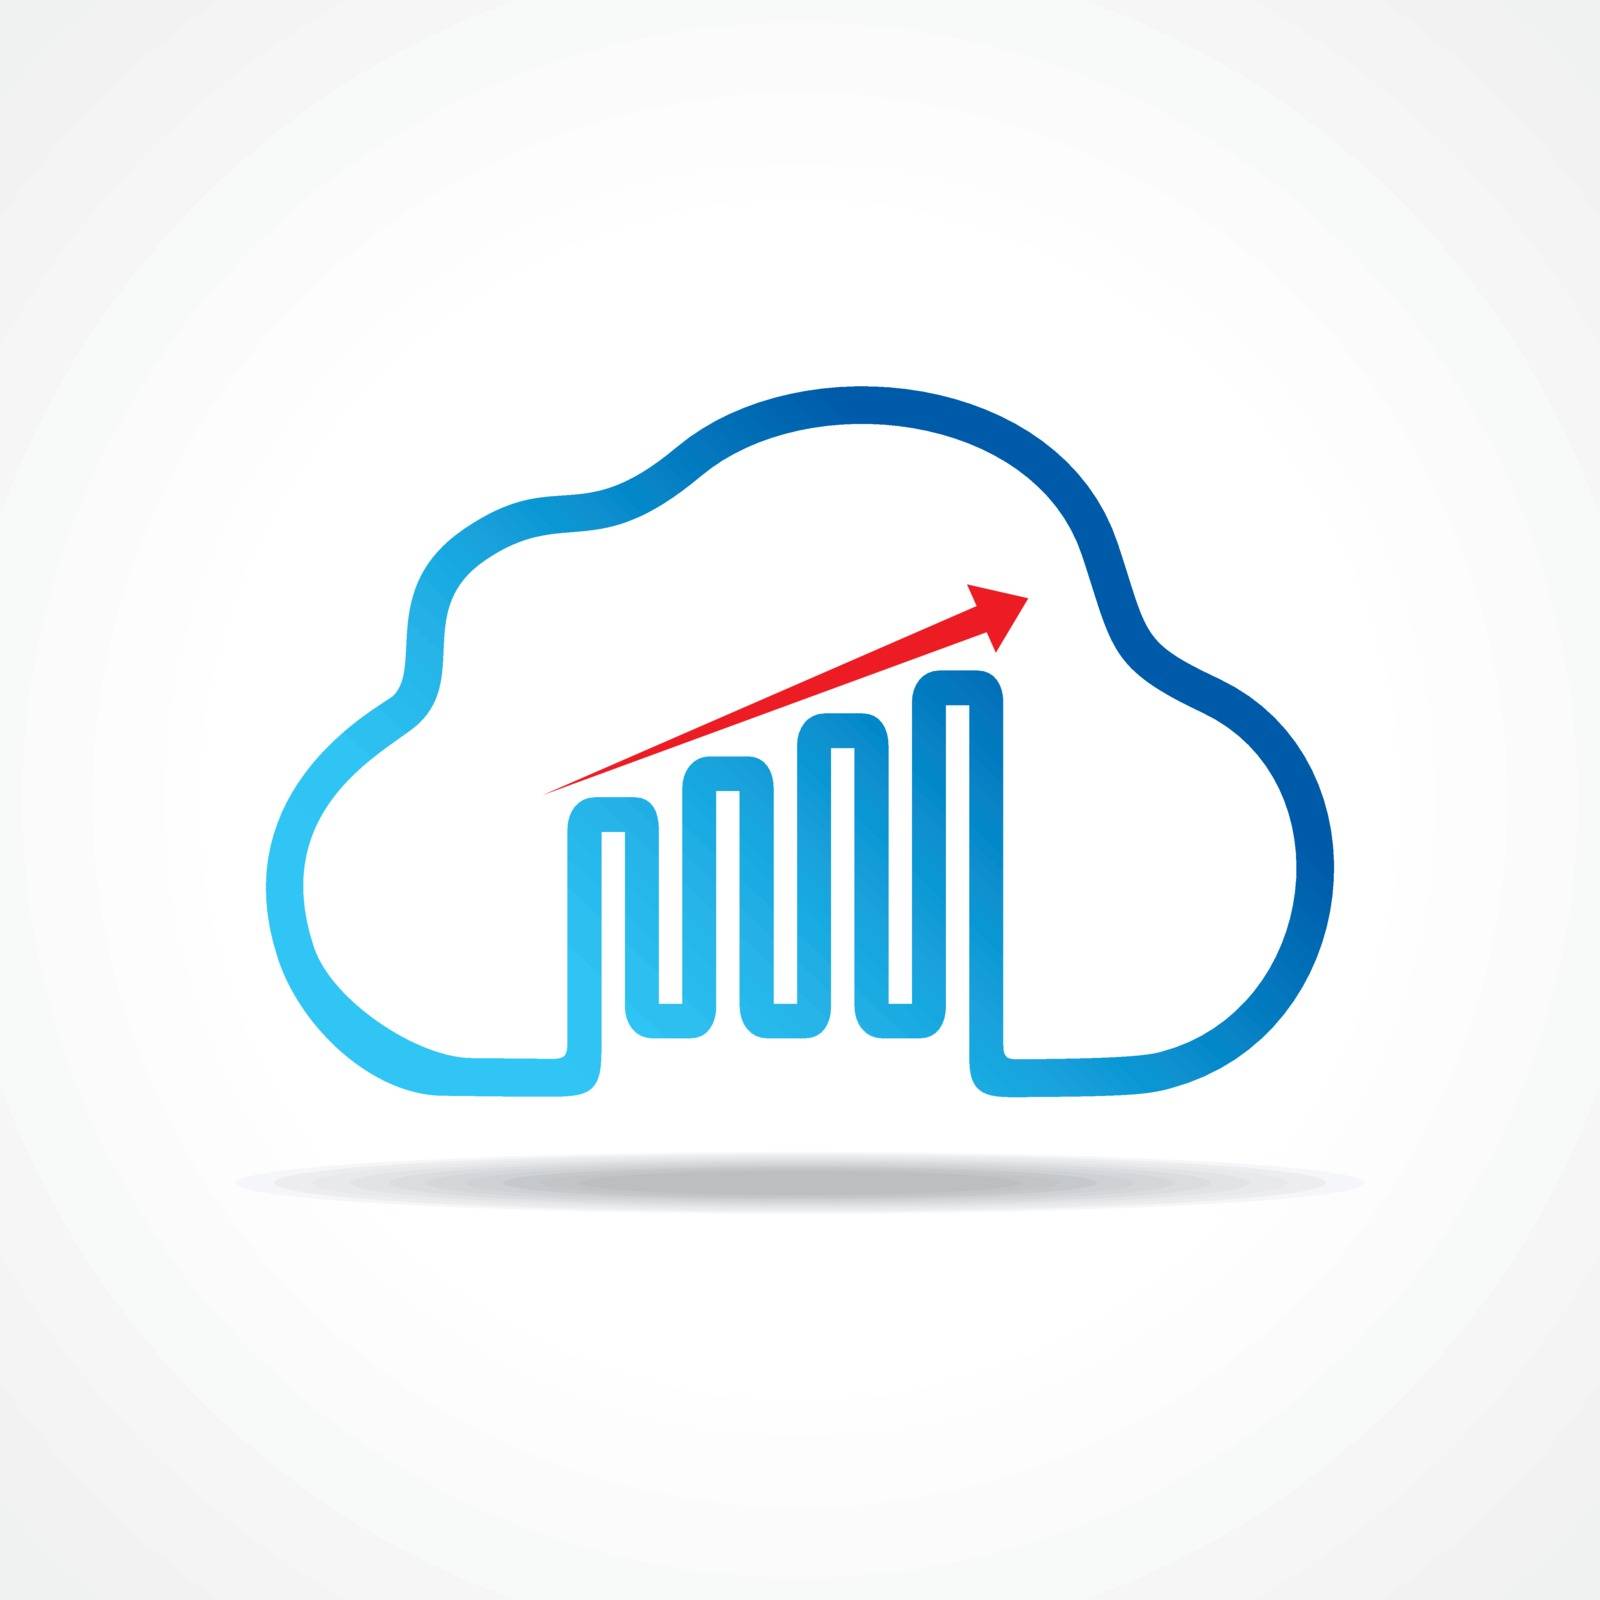 business growth graph design with cloud design concept vector